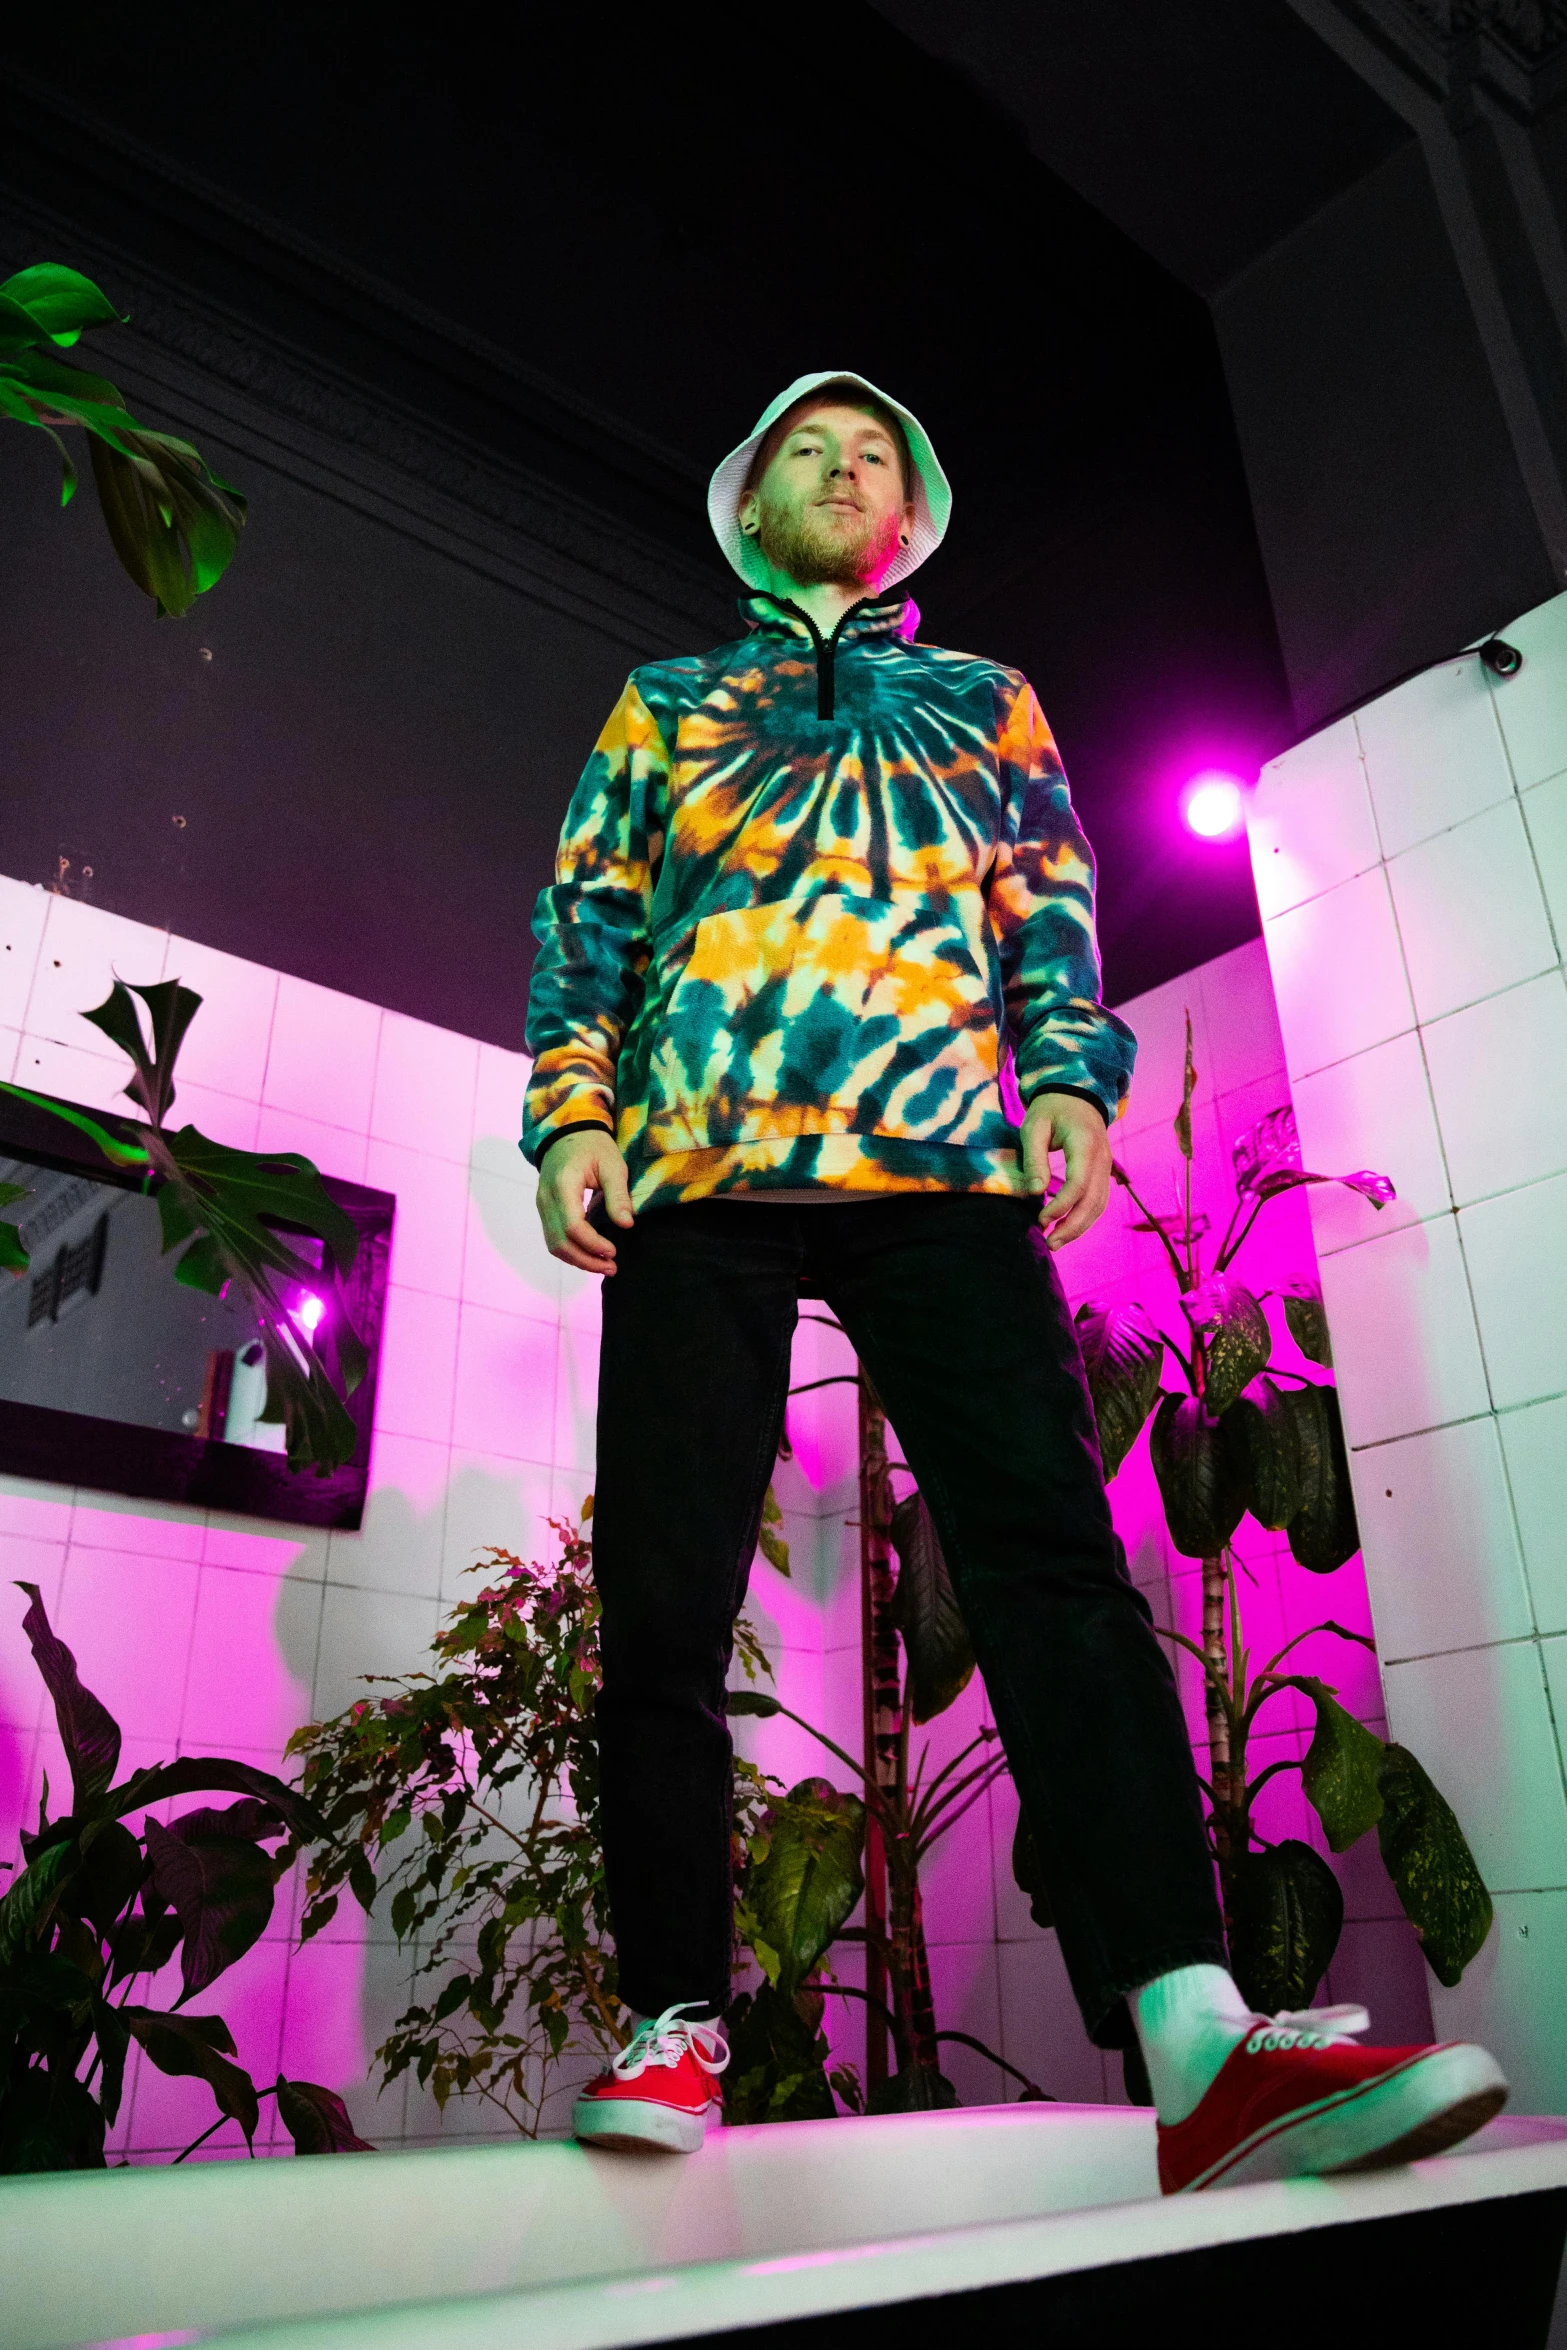 a man standing on top of a white platform, an album cover, unsplash, maximalism, wearing a hoodie, wearing a tie-dye shirt, standing in a dimly lit room, psychedelic vegetation